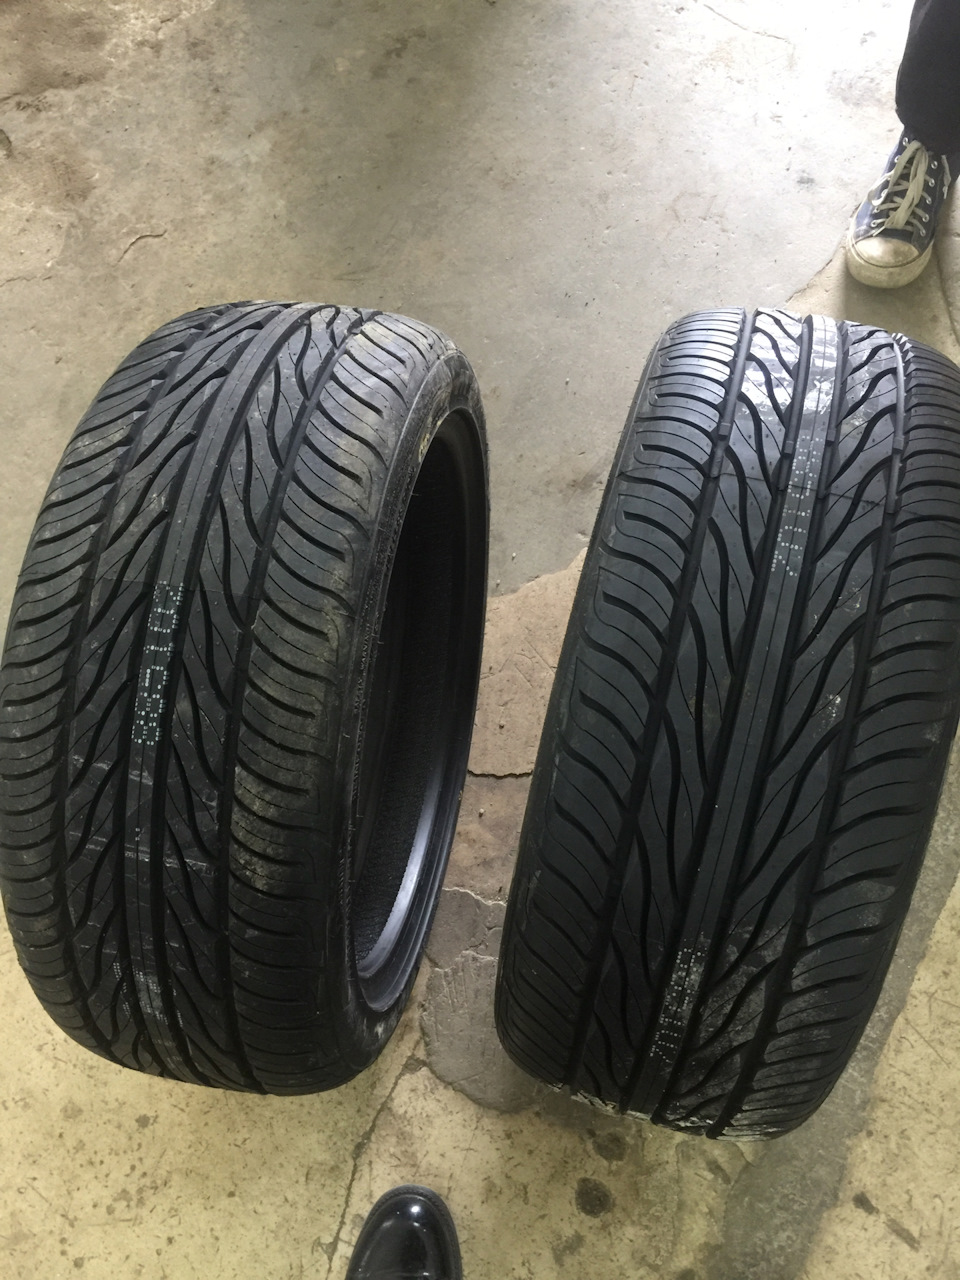 Летние шины 285 45 r22. Maxxis ma-z4s Victra. Maxxis ma-z4s Victra 285/45 r22 114v. Шины Maxxis Victra z4s. Maxxis ma-z4s 285 45 22.